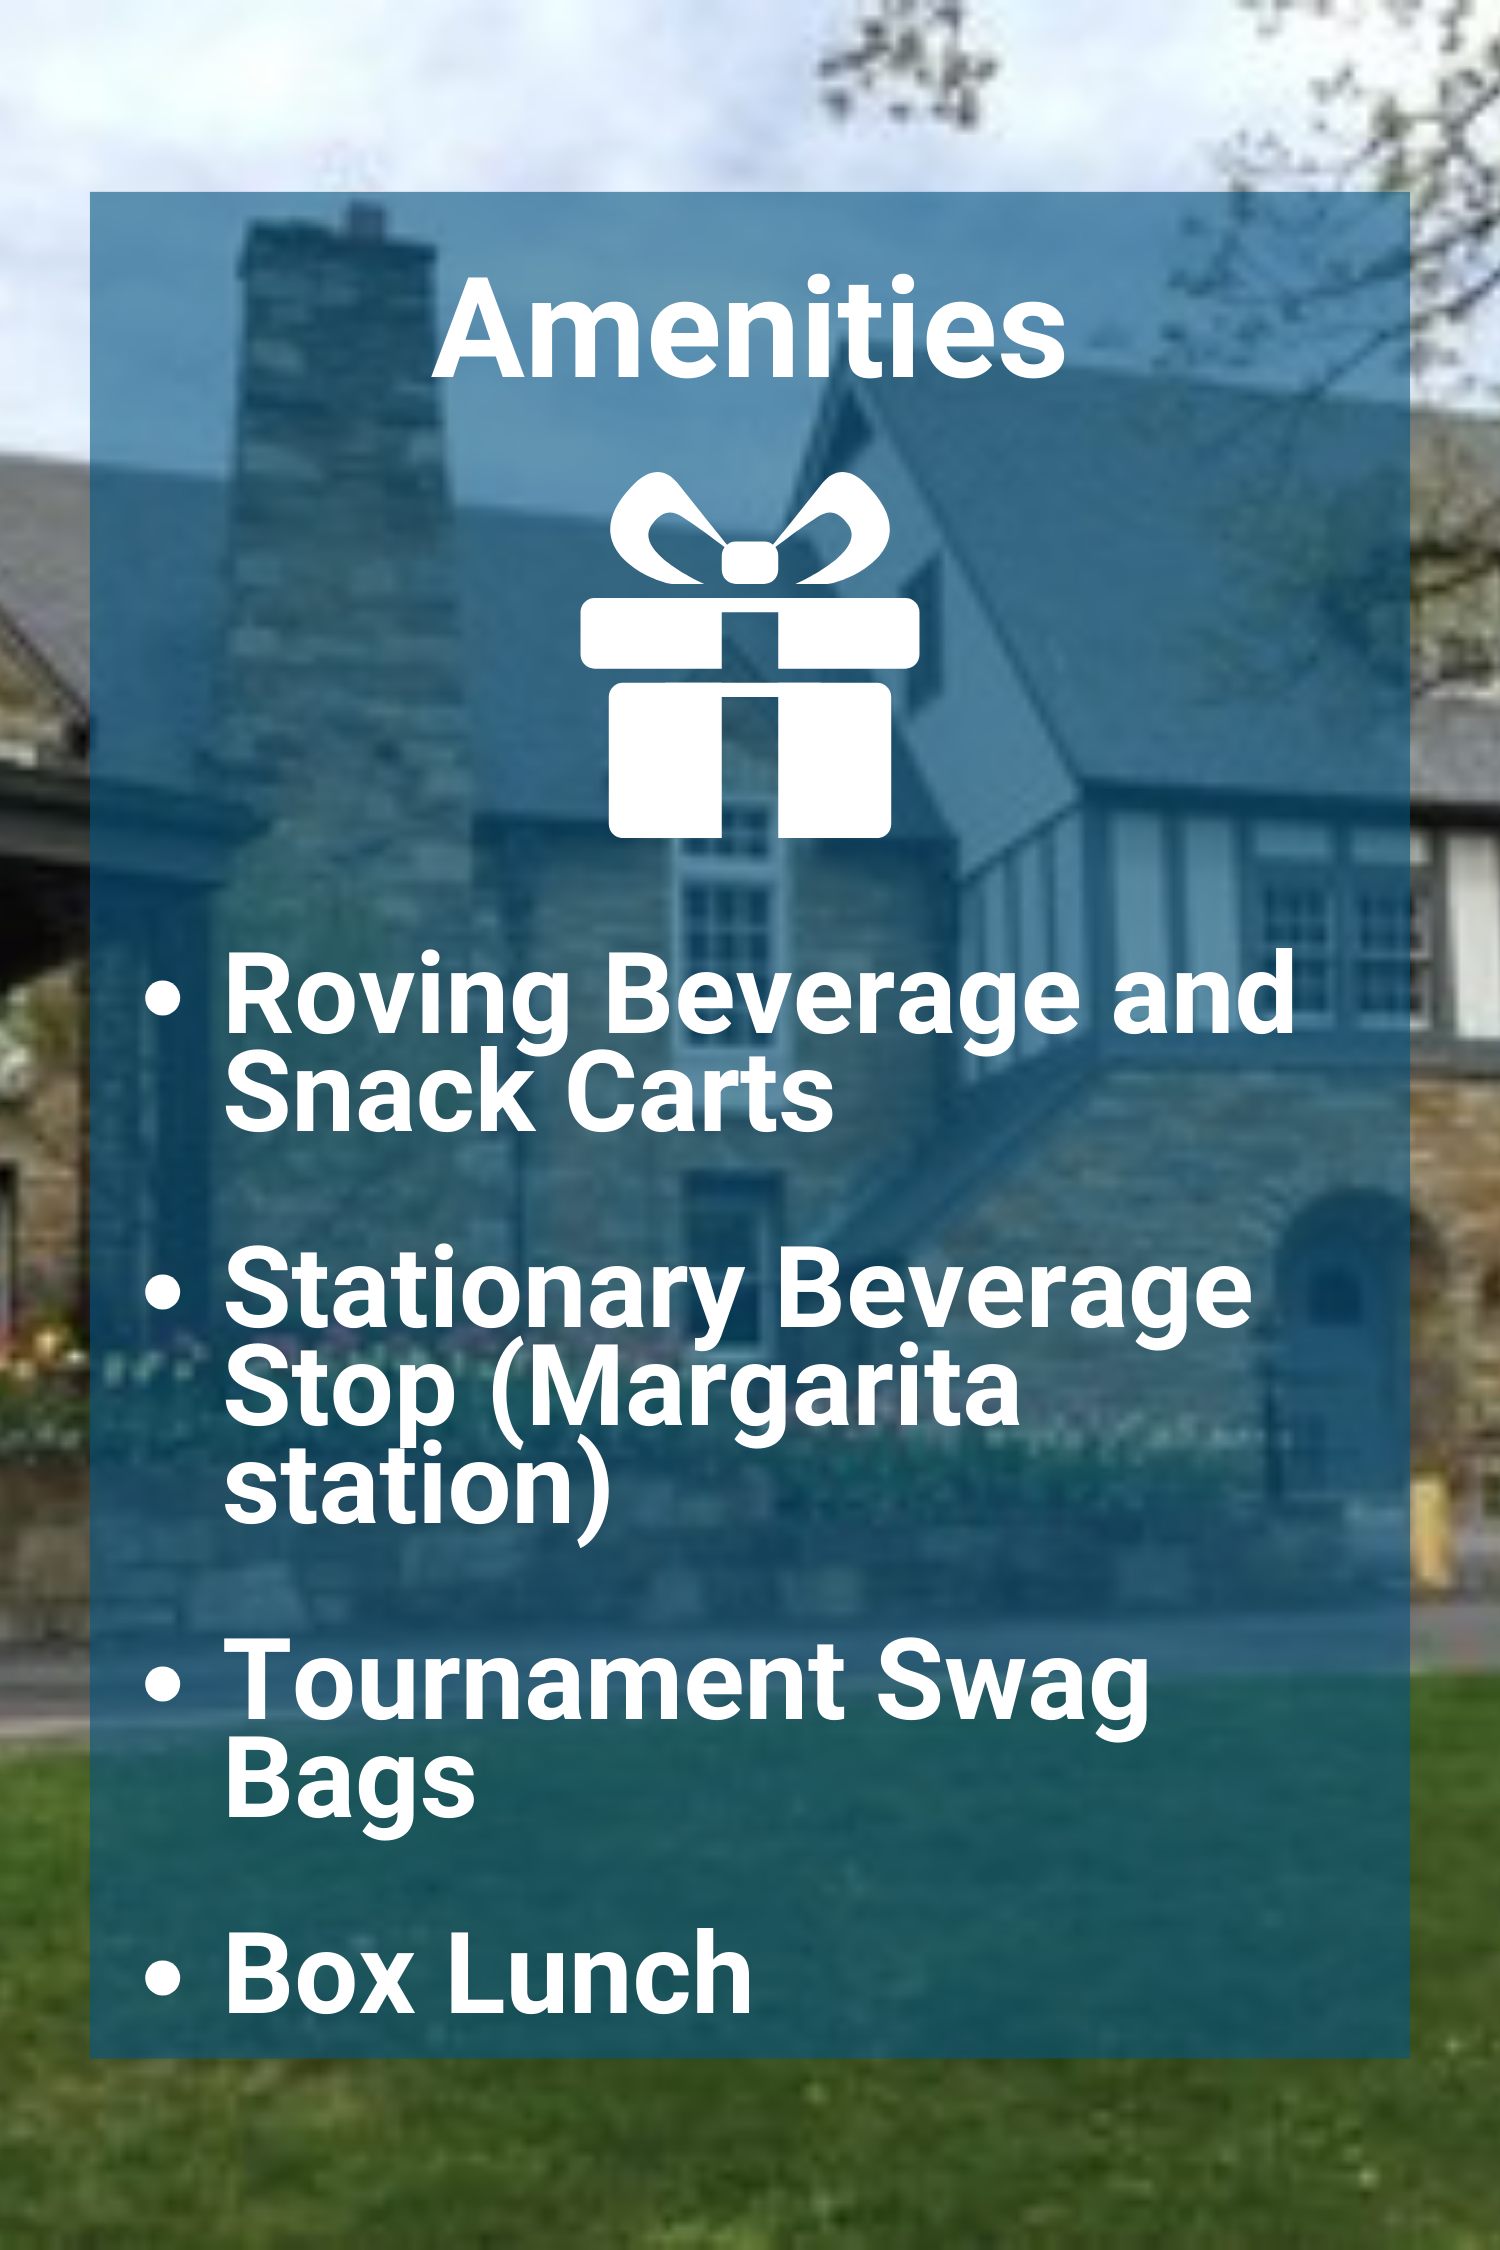 Updated AMENITIES graphic.png